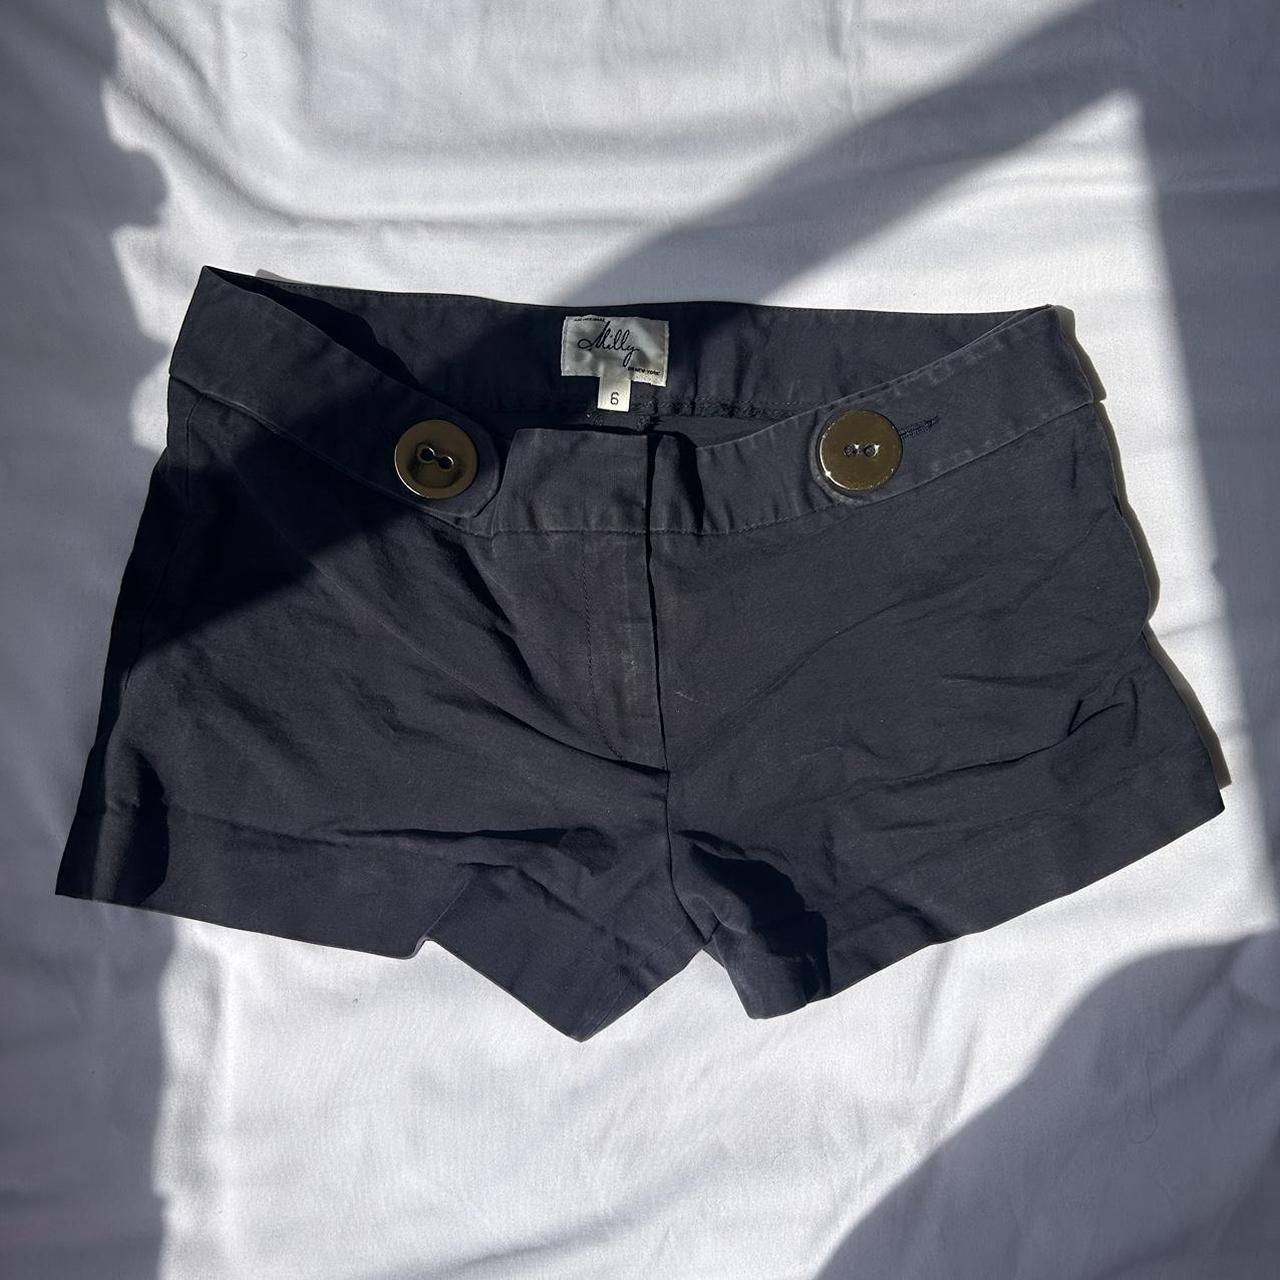 Milly Women's Navy and Gold Shorts | Depop